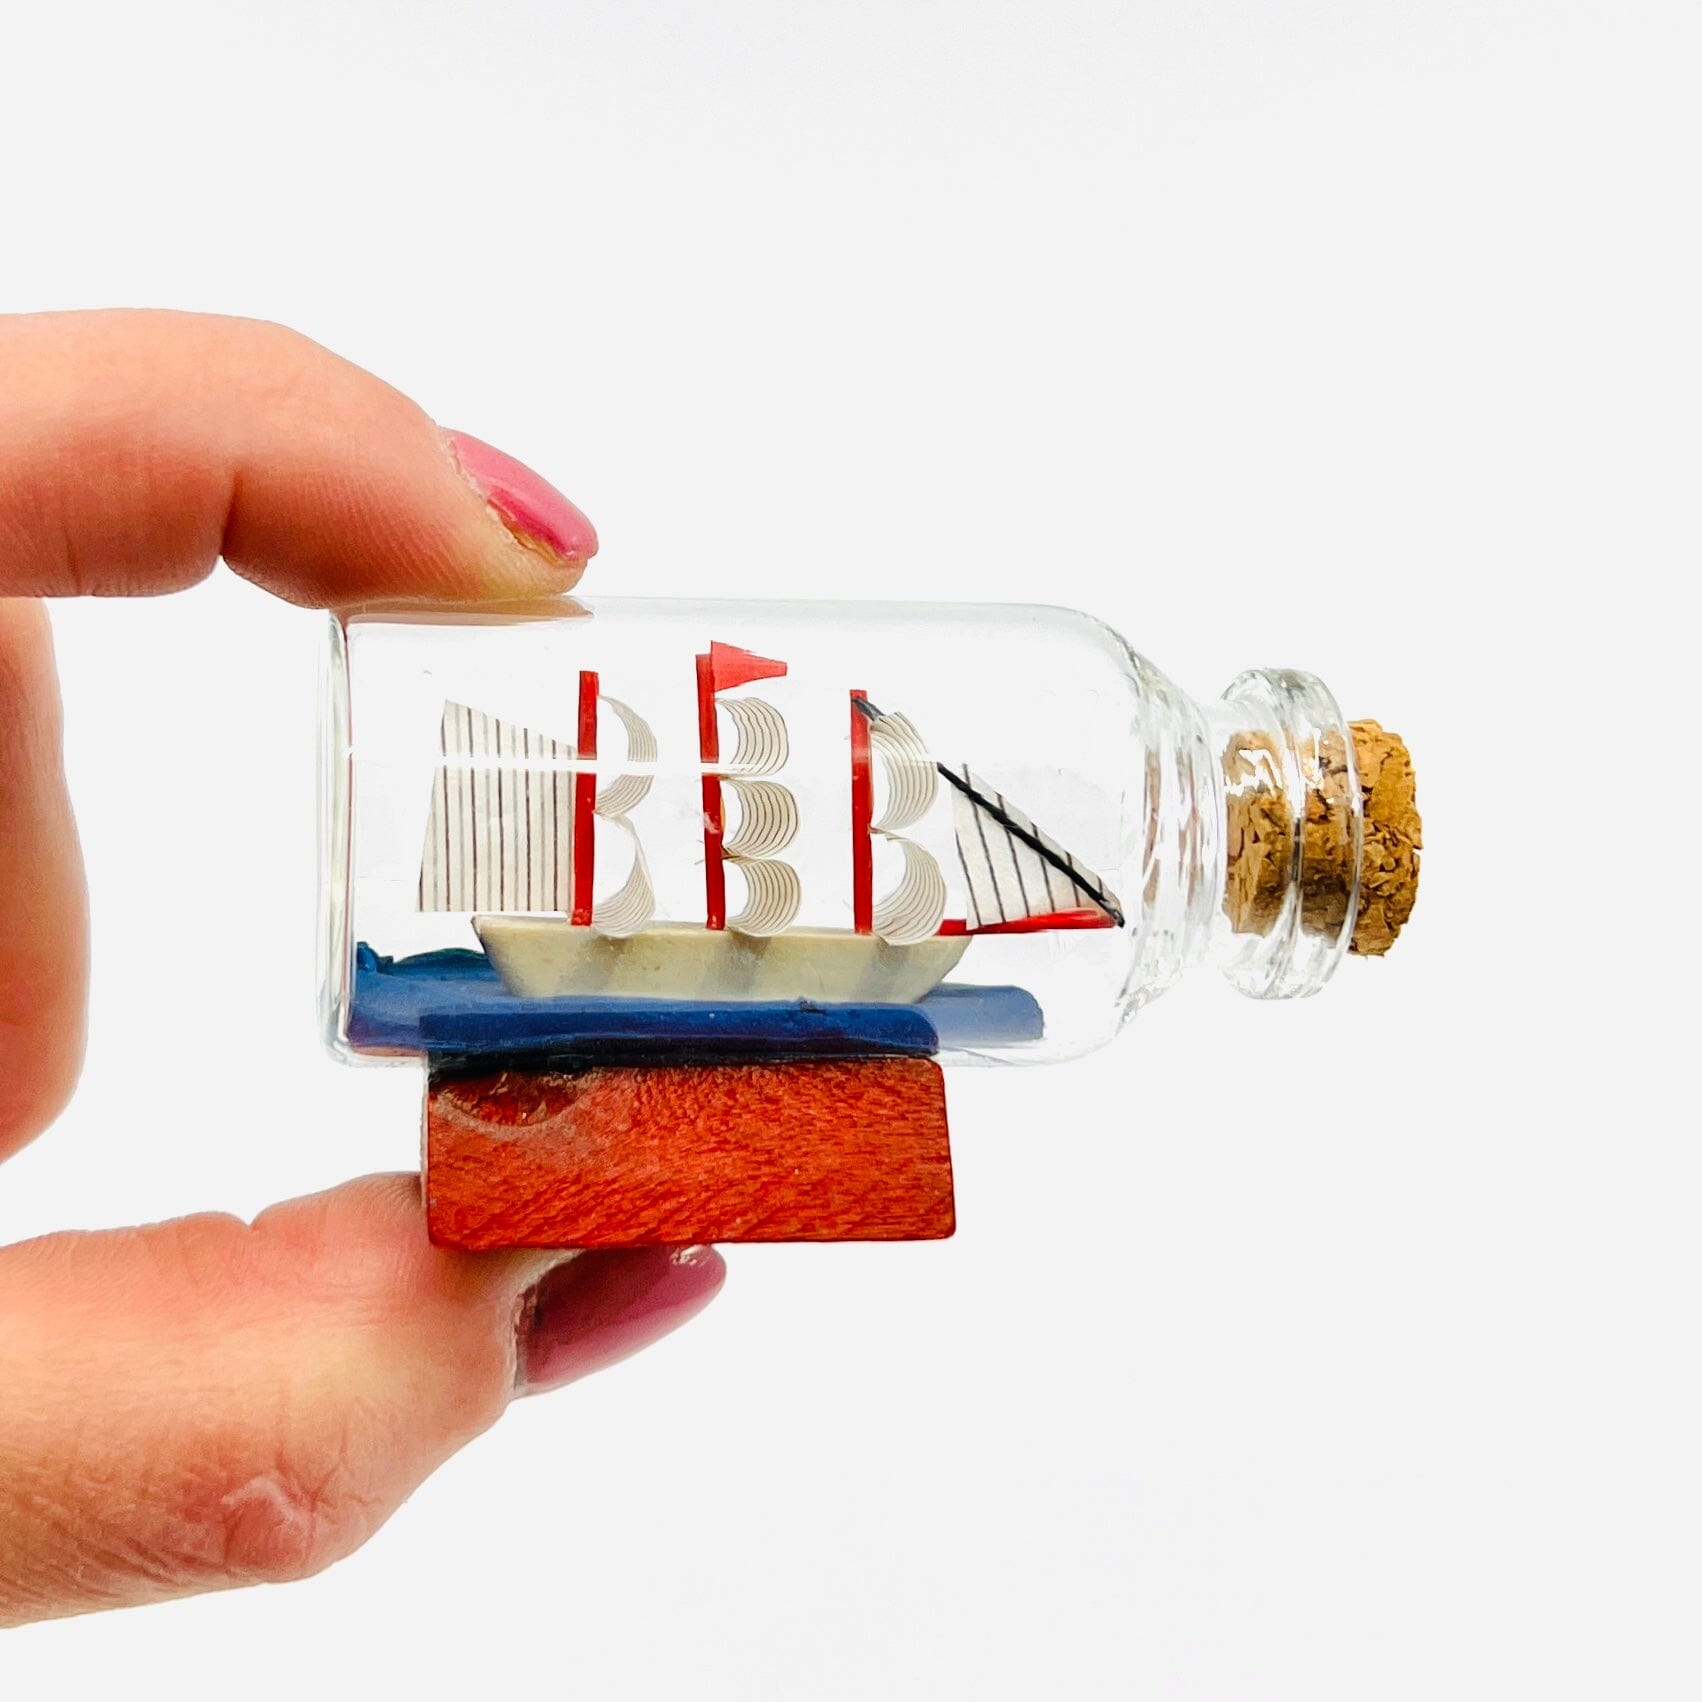 Tiniest Ship in a Bottle Miniature - 